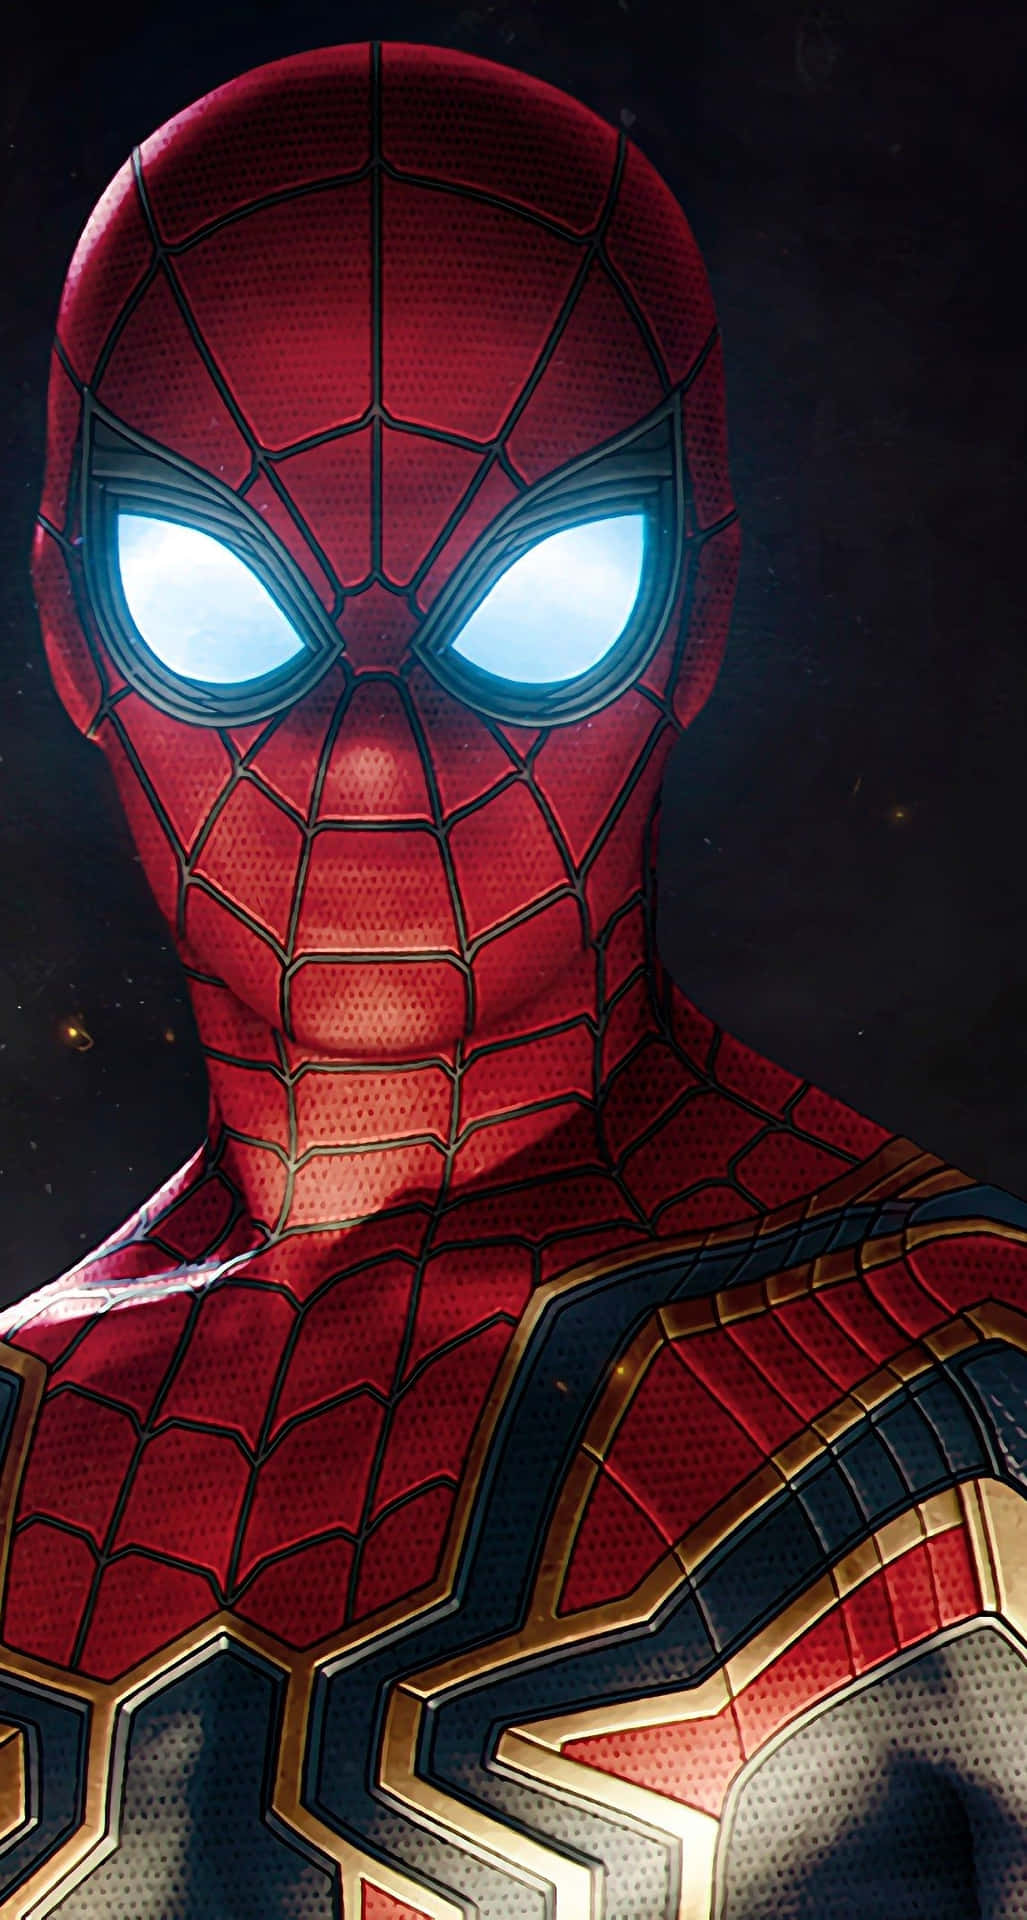 Get Incredible Defense Against Cyberattacks With the Spider-Man Phone Wallpaper